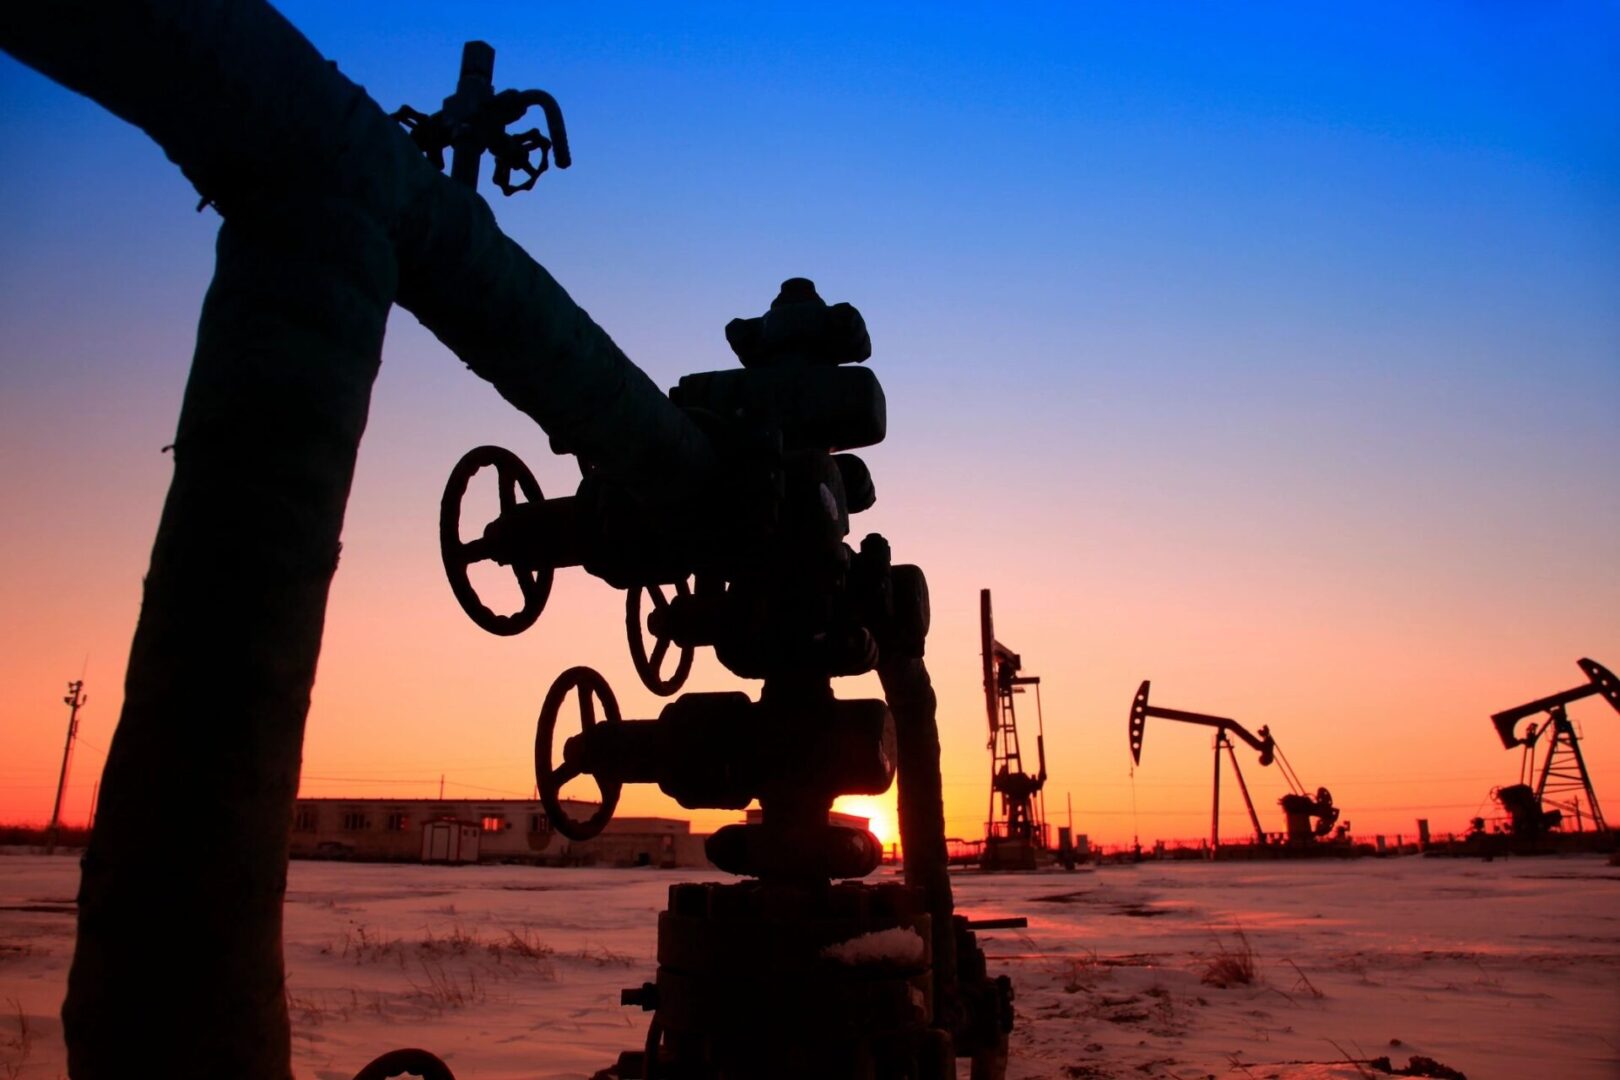 A view of an oil field with the sun setting.